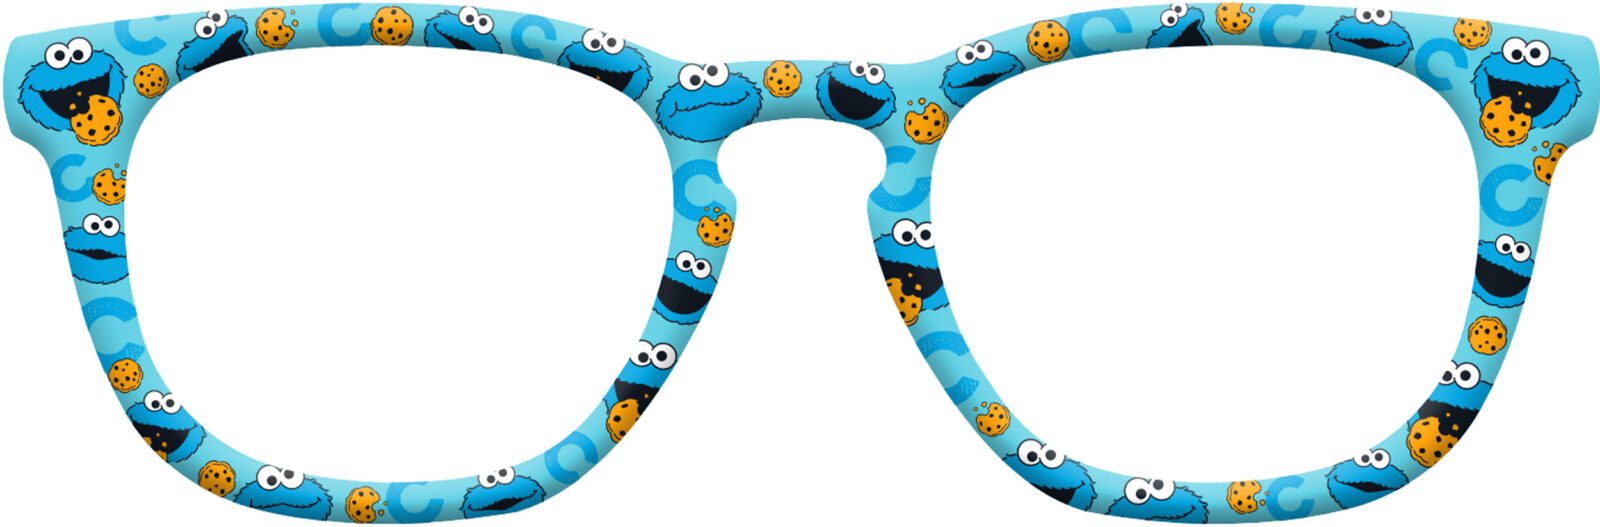 Your Kiddo Will Love These New Sesame Street Specs from PAIR Eyewear How To Make Pair Eyewear Toppers